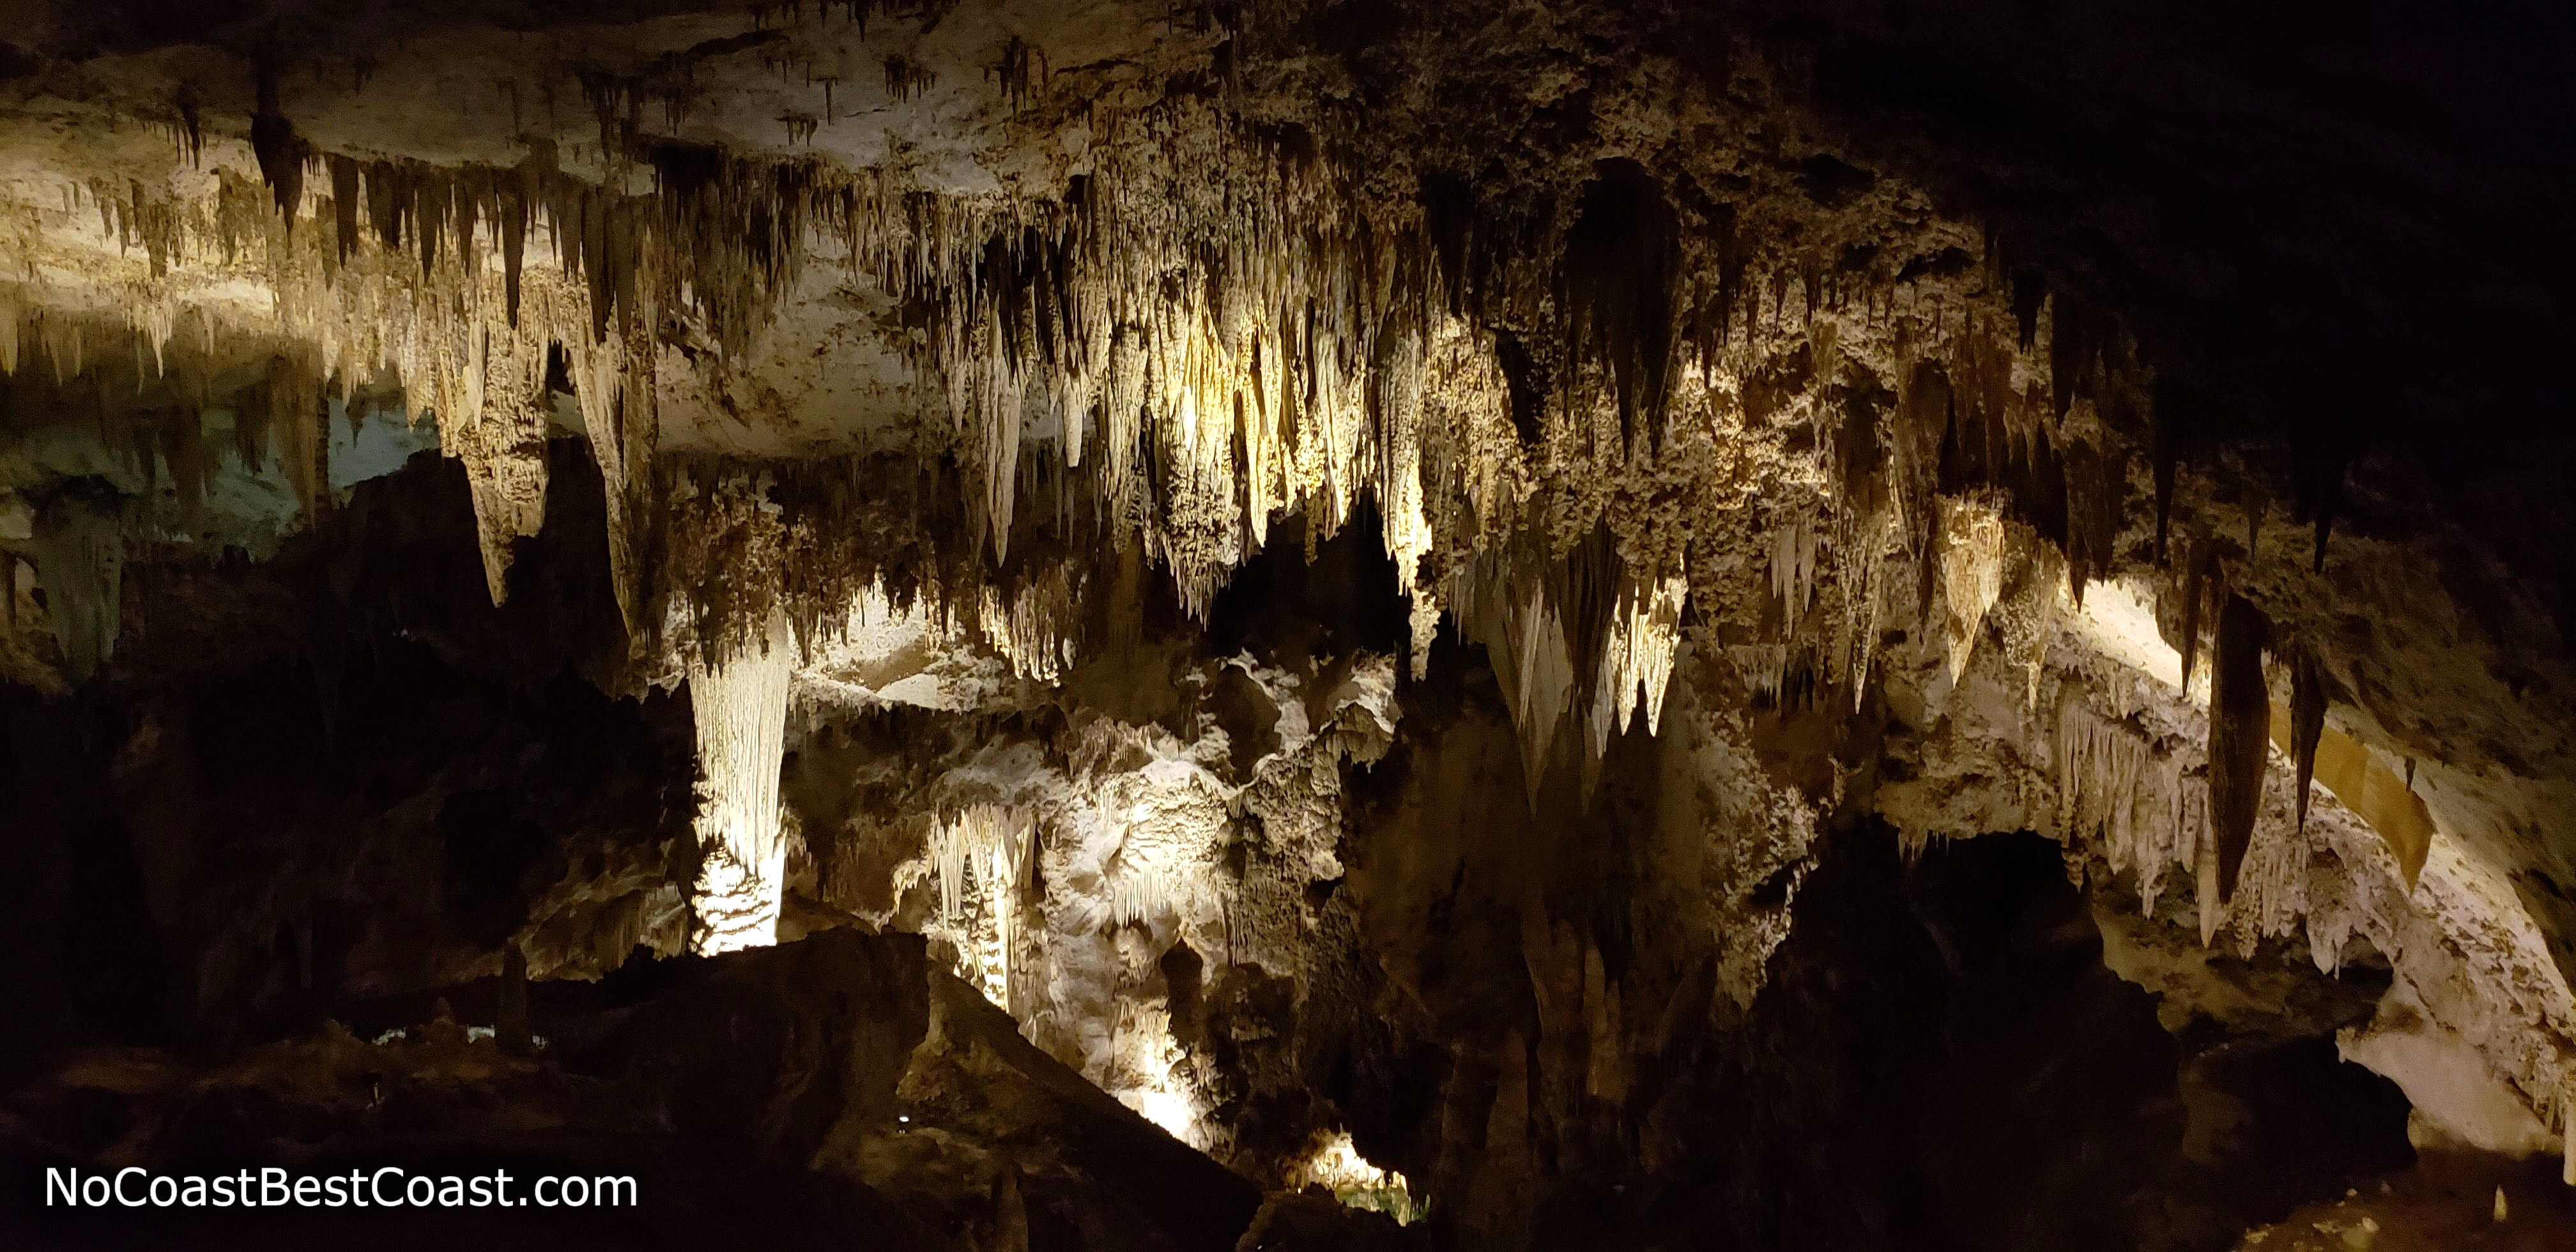 The delicate stalactites of Carlsbad Caverns are something everyone should see in their lifetime